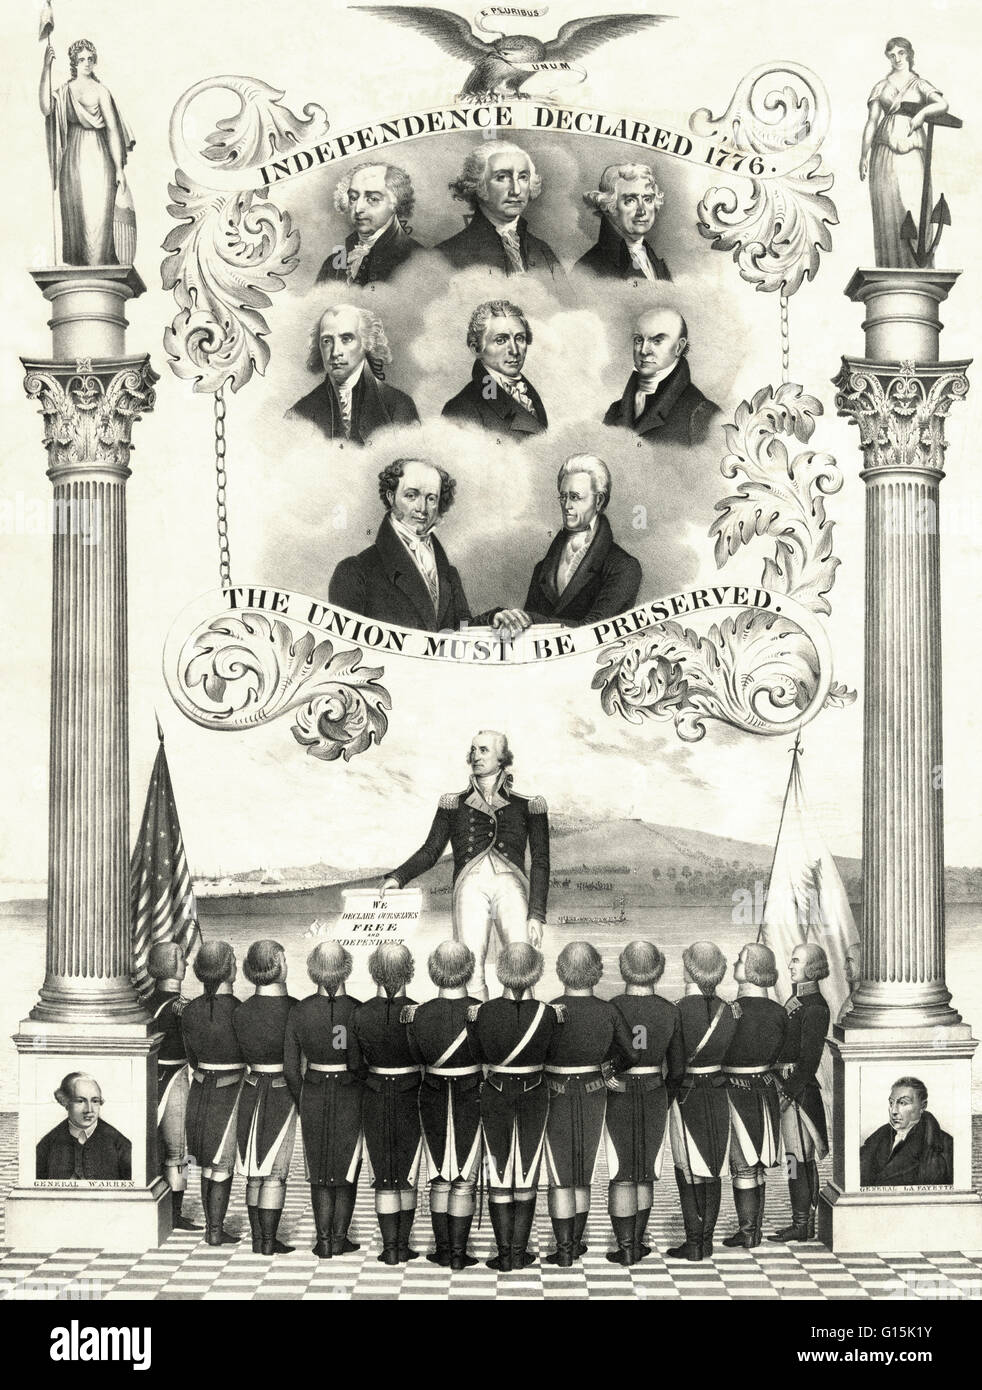 Lithograph with letterpress text entitled: Independence declared 1776. The Union must be preserved. A memorial to the Declaration of Independence and the American Revolution, with distinctly pro-Democratic overtones. Below the title 'Independence Declared Stock Photo